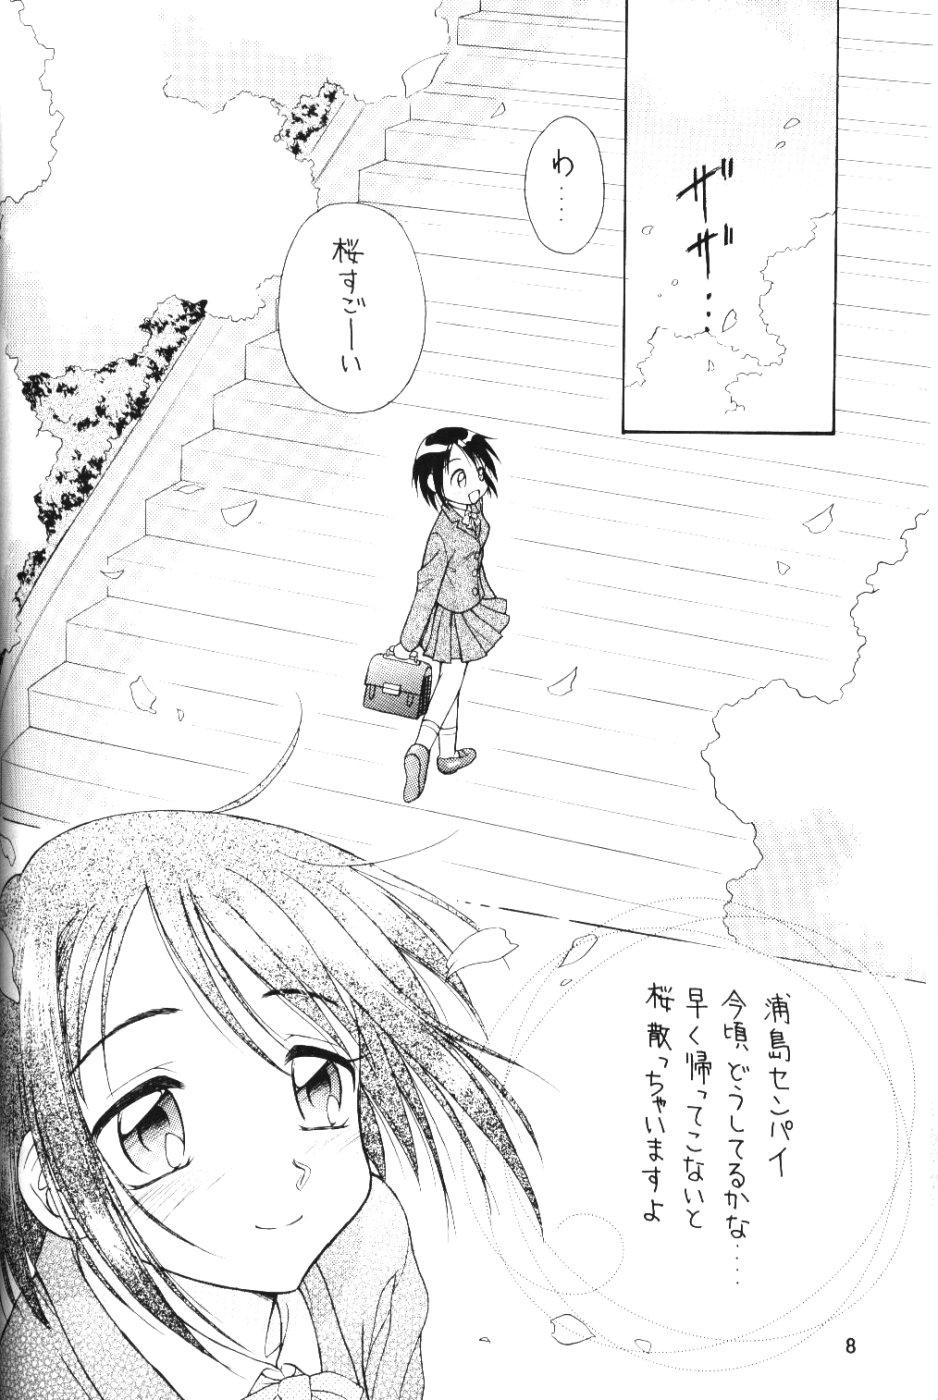 Homemade Lovely 4 - Love hina Amateurs Gone - Page 7